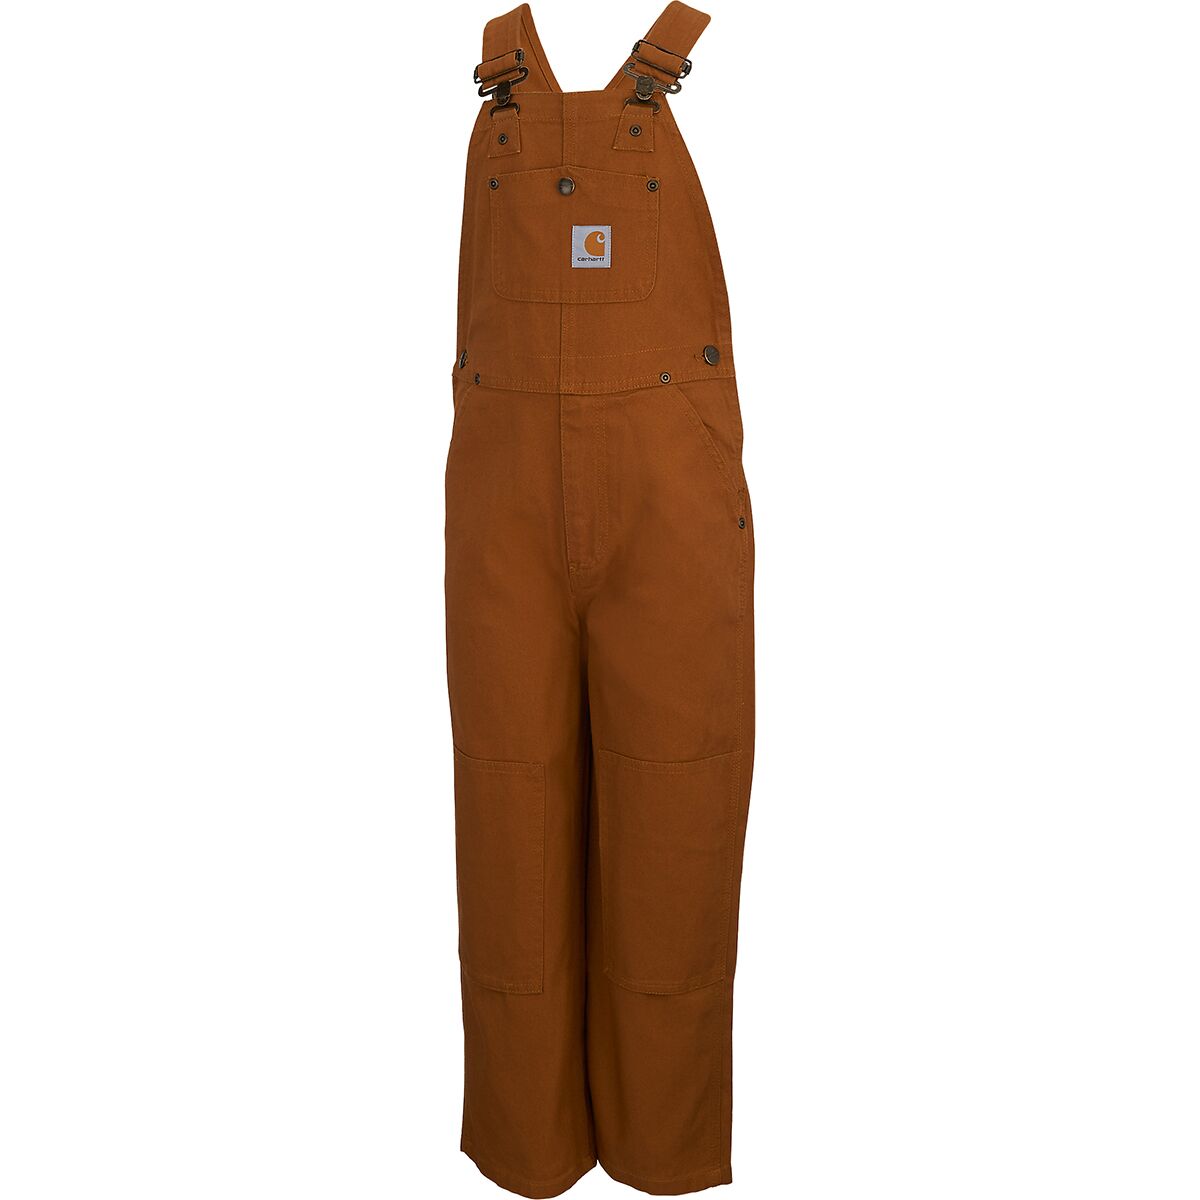 Carhartt Canvas Bib Overall Pant - Toddlers'